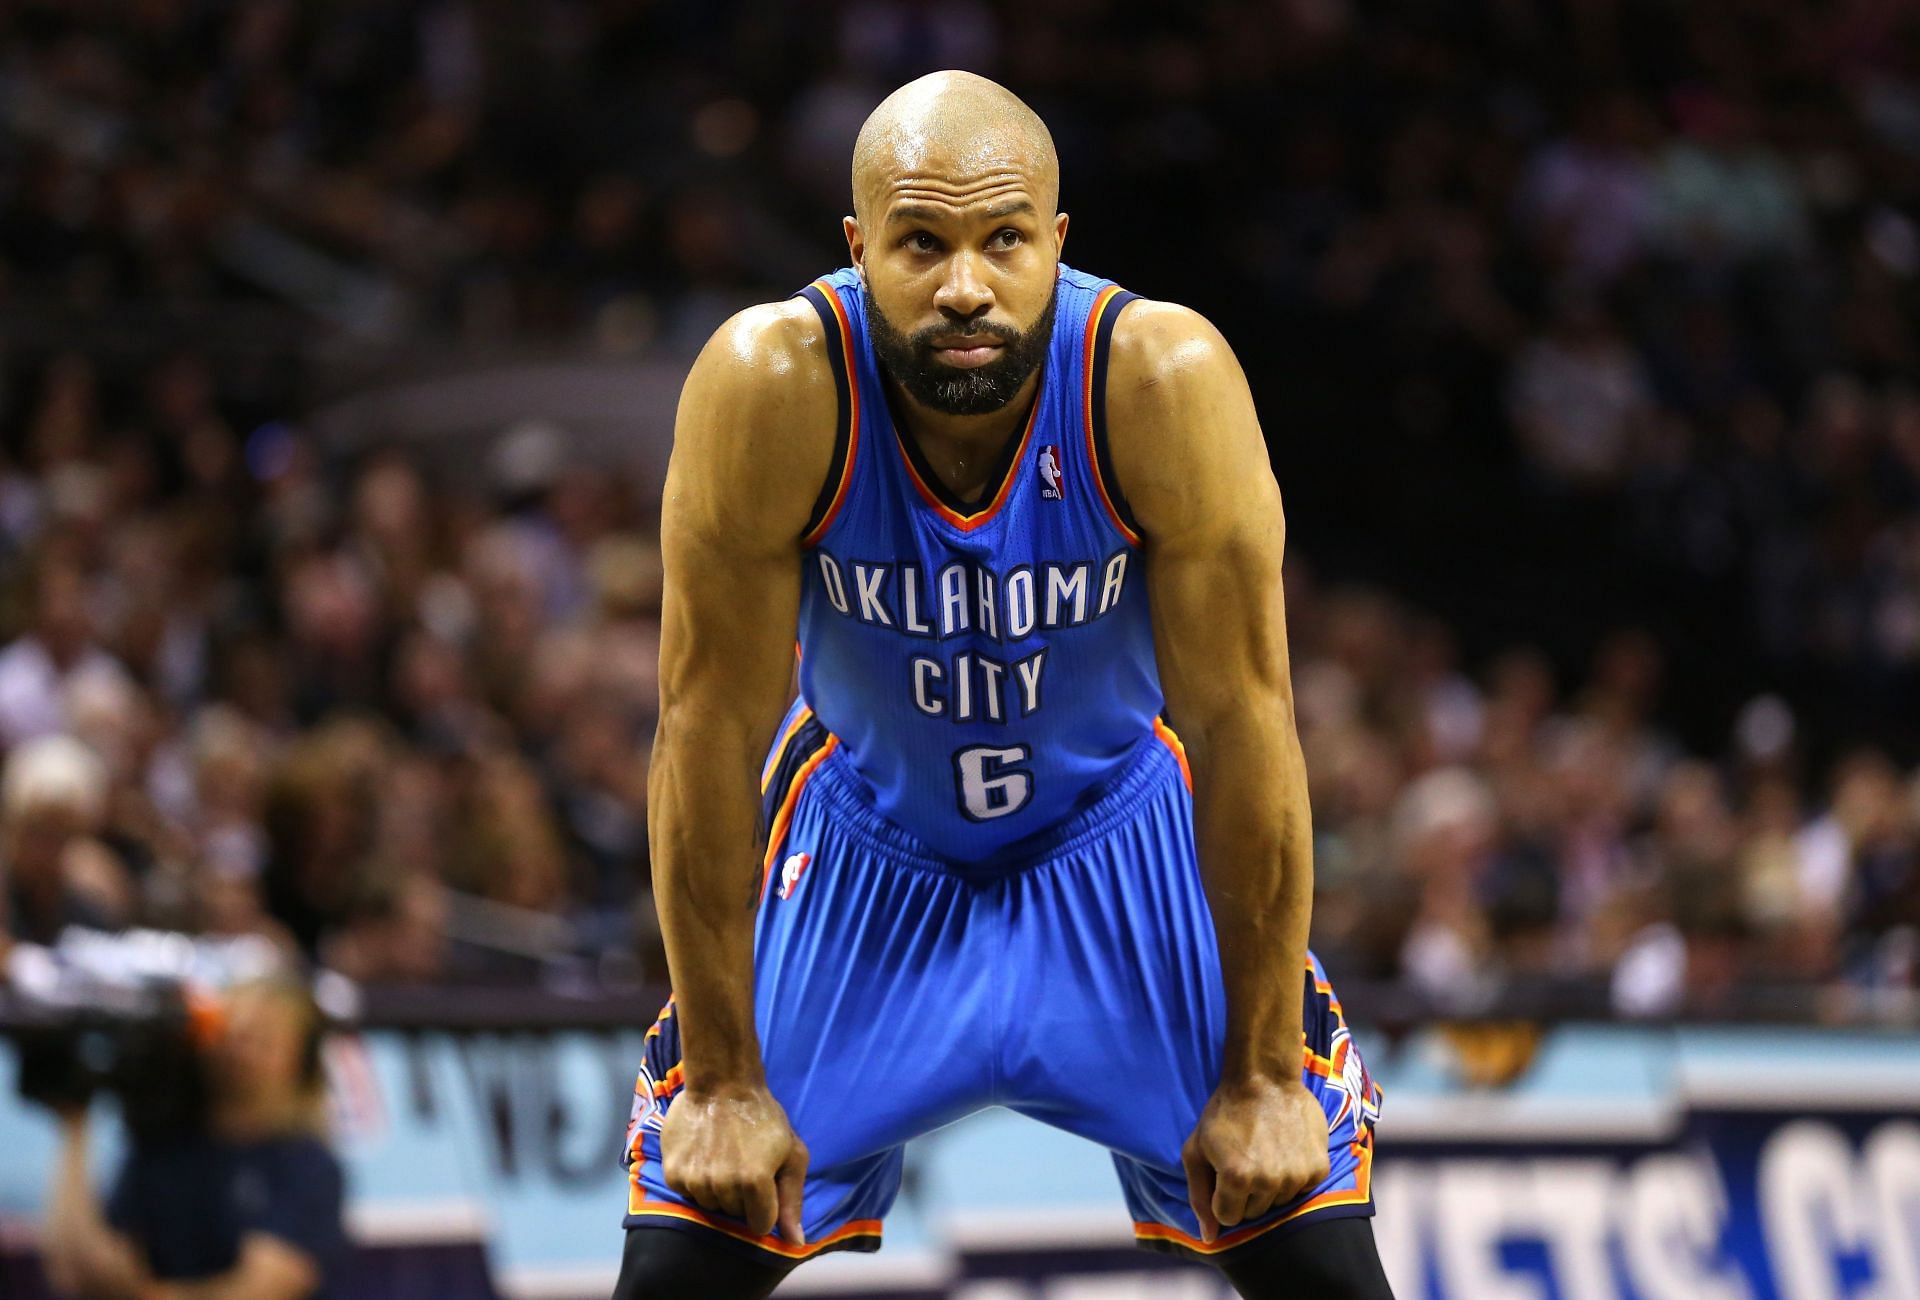 Derek Fisher of the OKC Thunder during Game 1 of the 2014 NBA Western Conference Finals